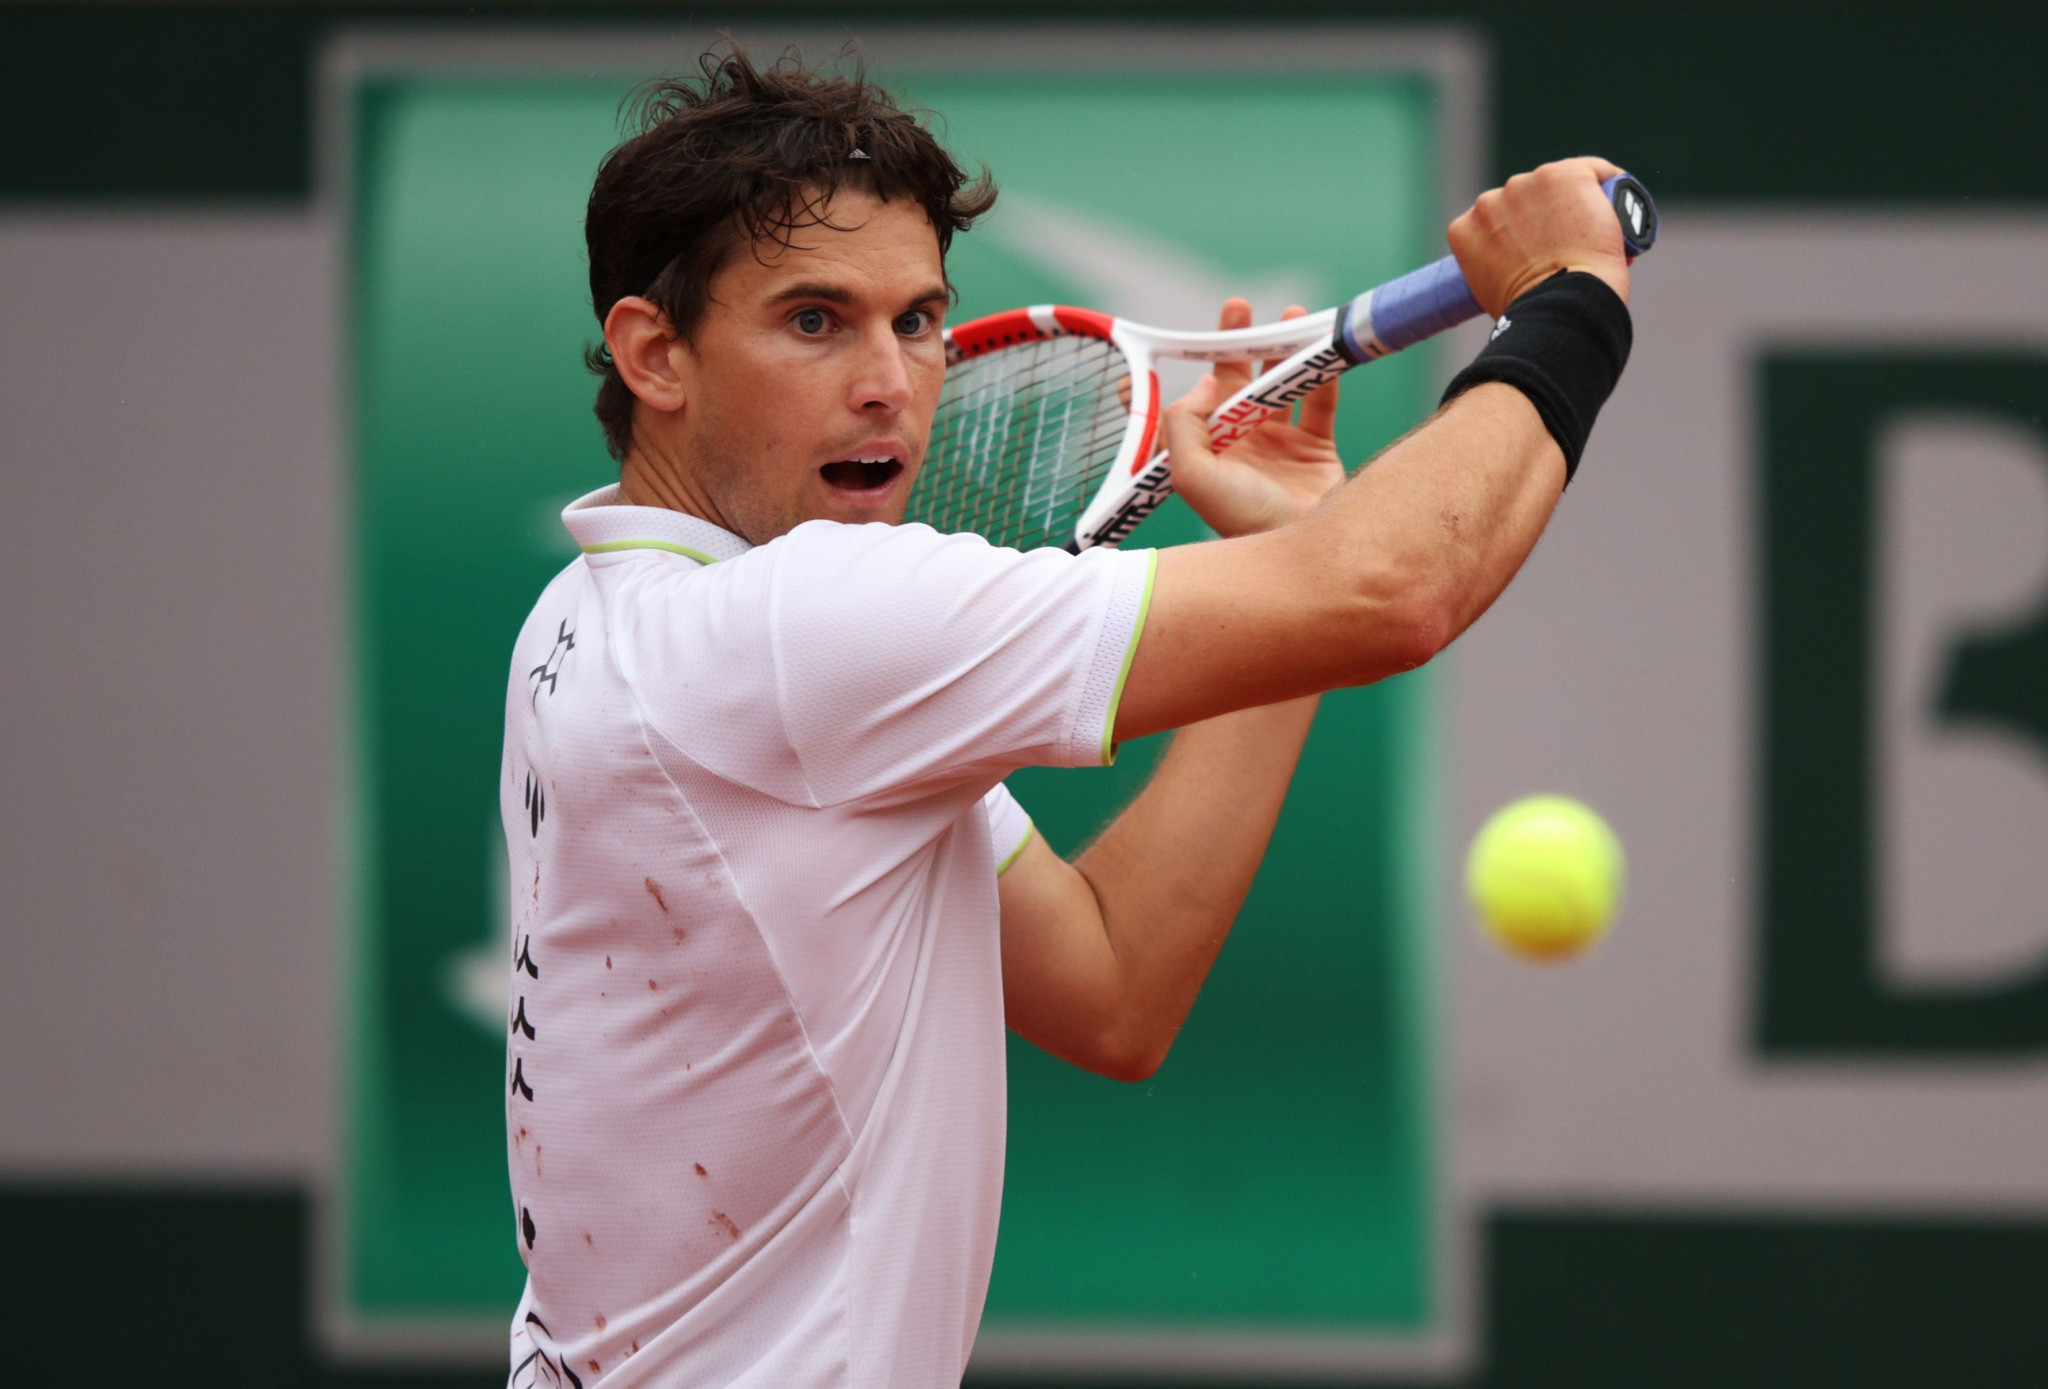 Thiem suffers "painful" first-round loss to Dellien at French Open